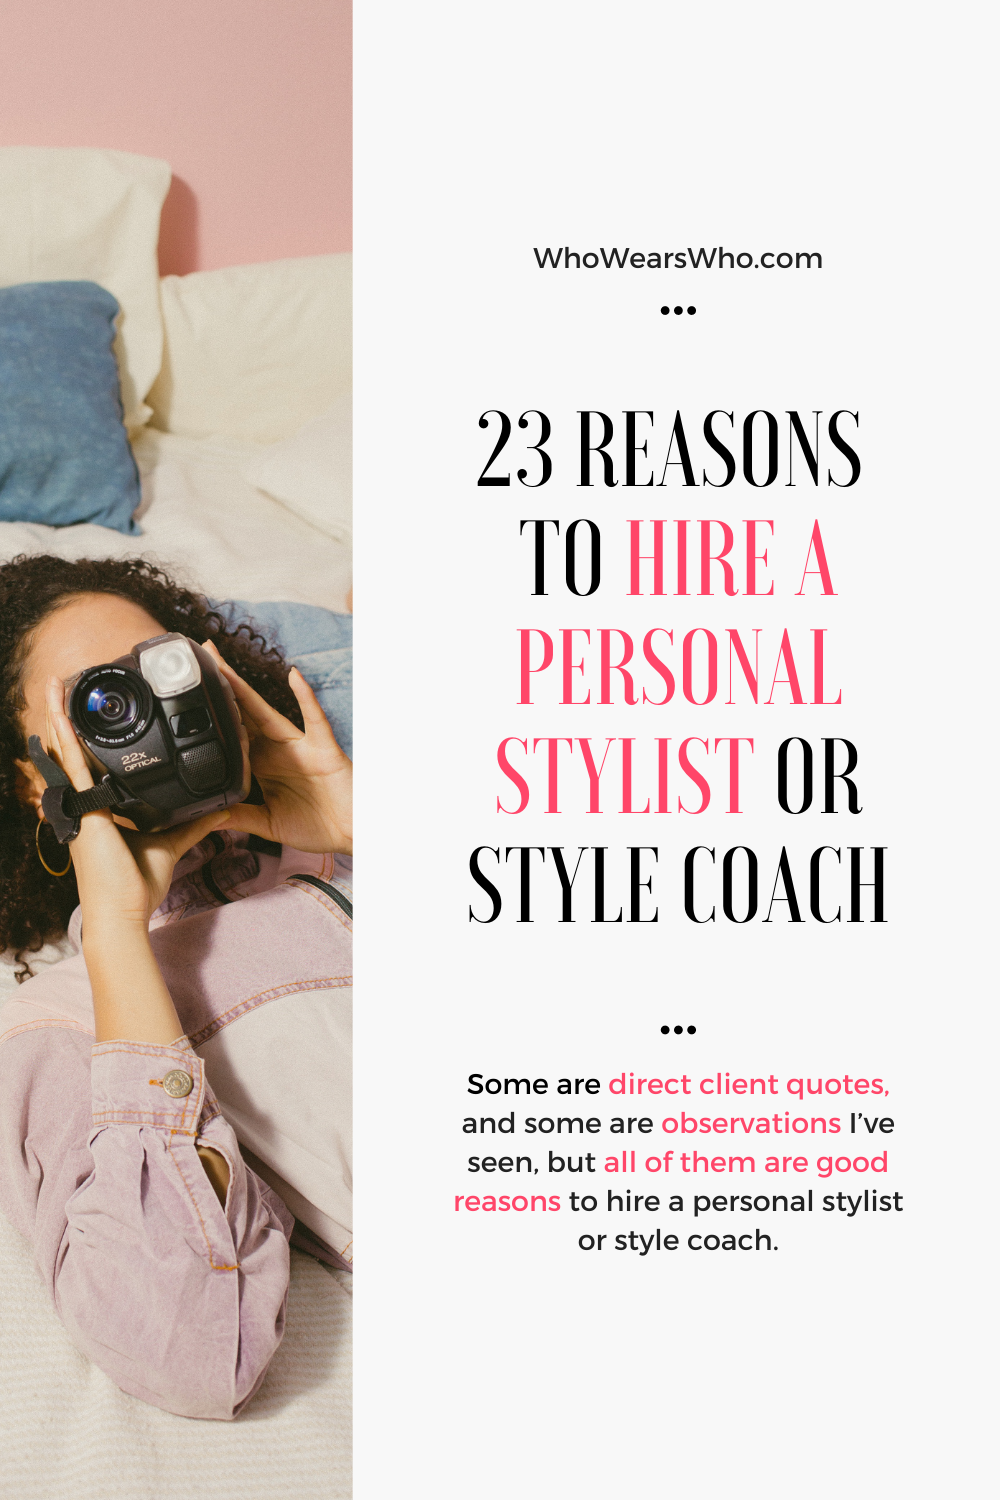 23 Reasons to Hire a Personal Stylist or Style Coach